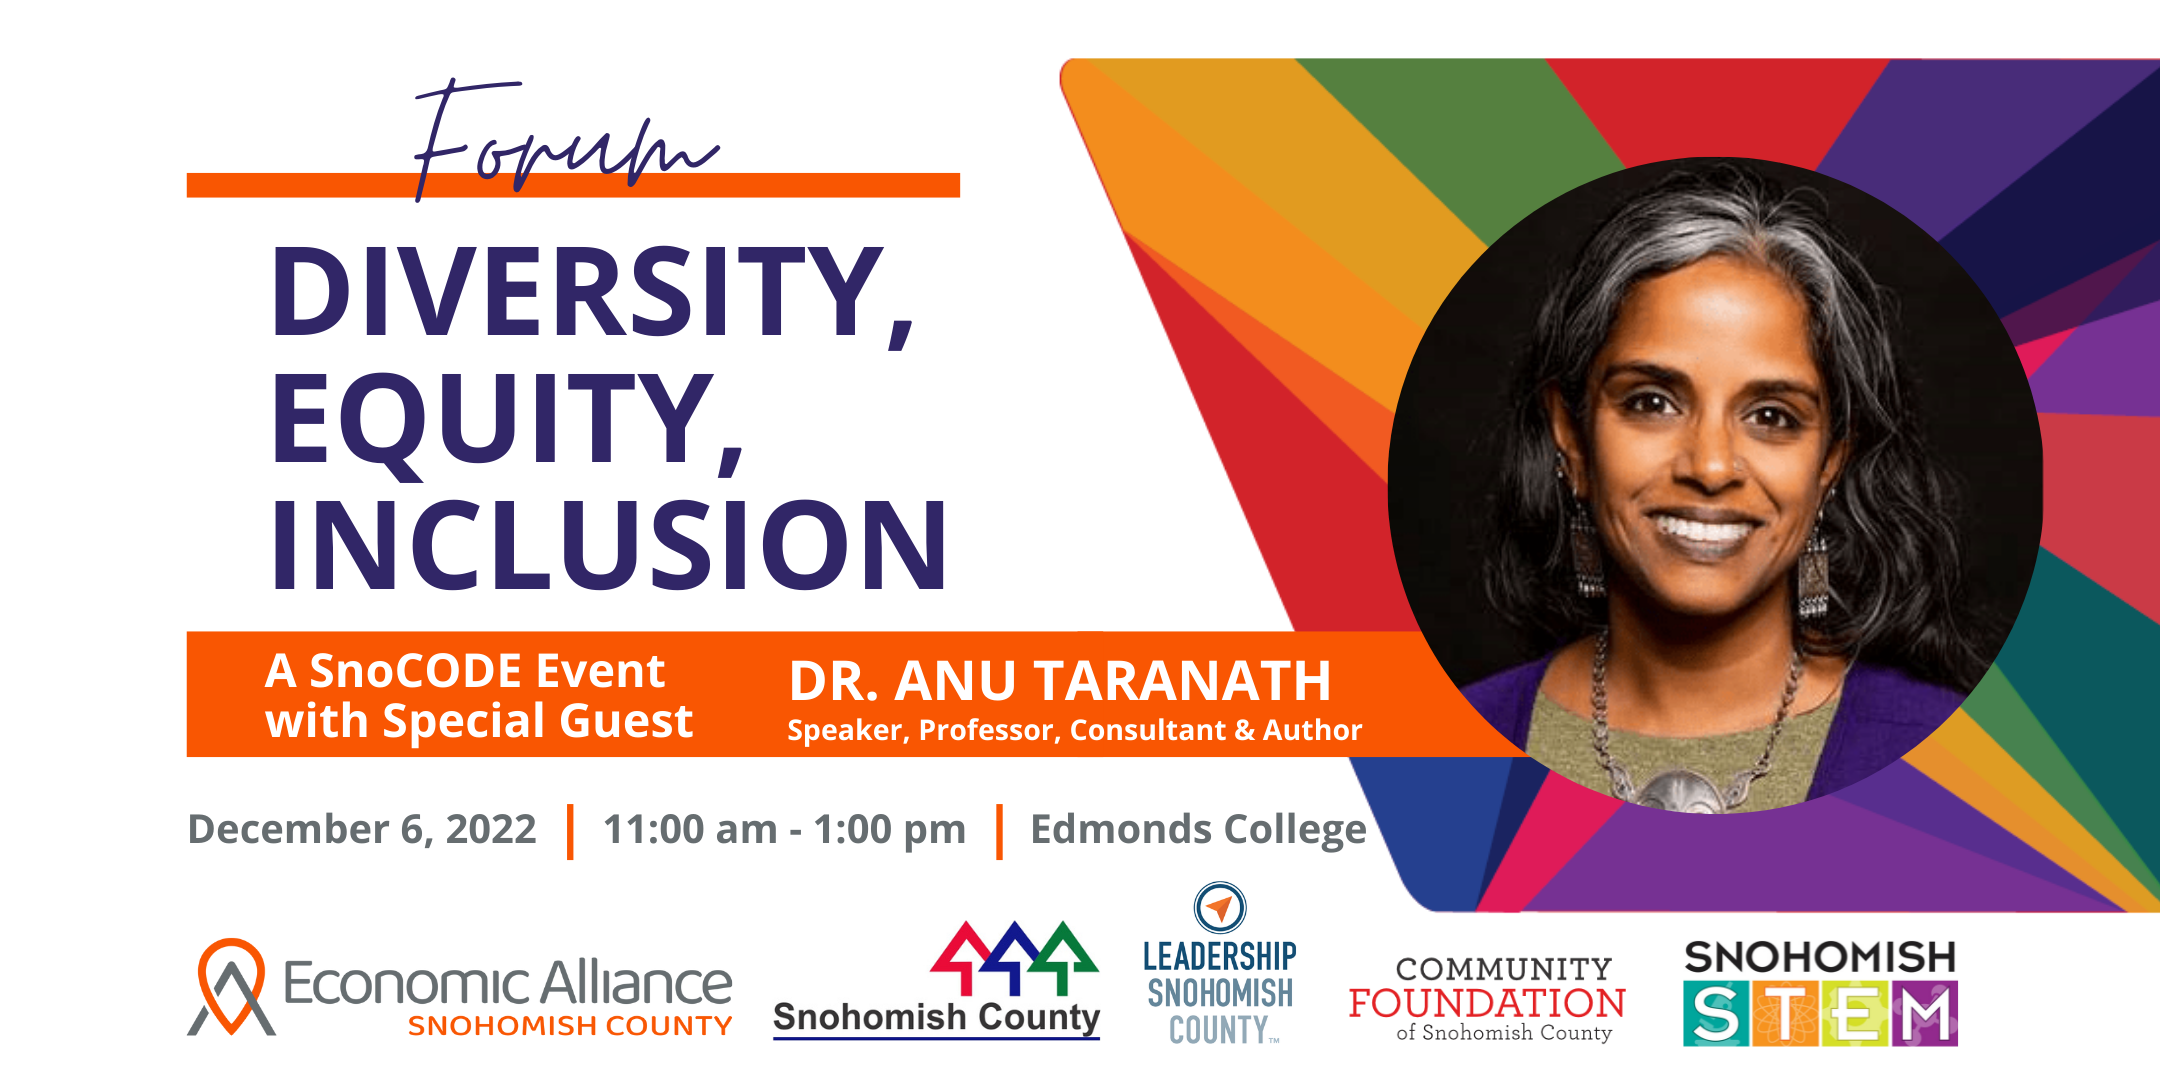 Event Promo Photo For Diversity, Equity, Inclusion Forum